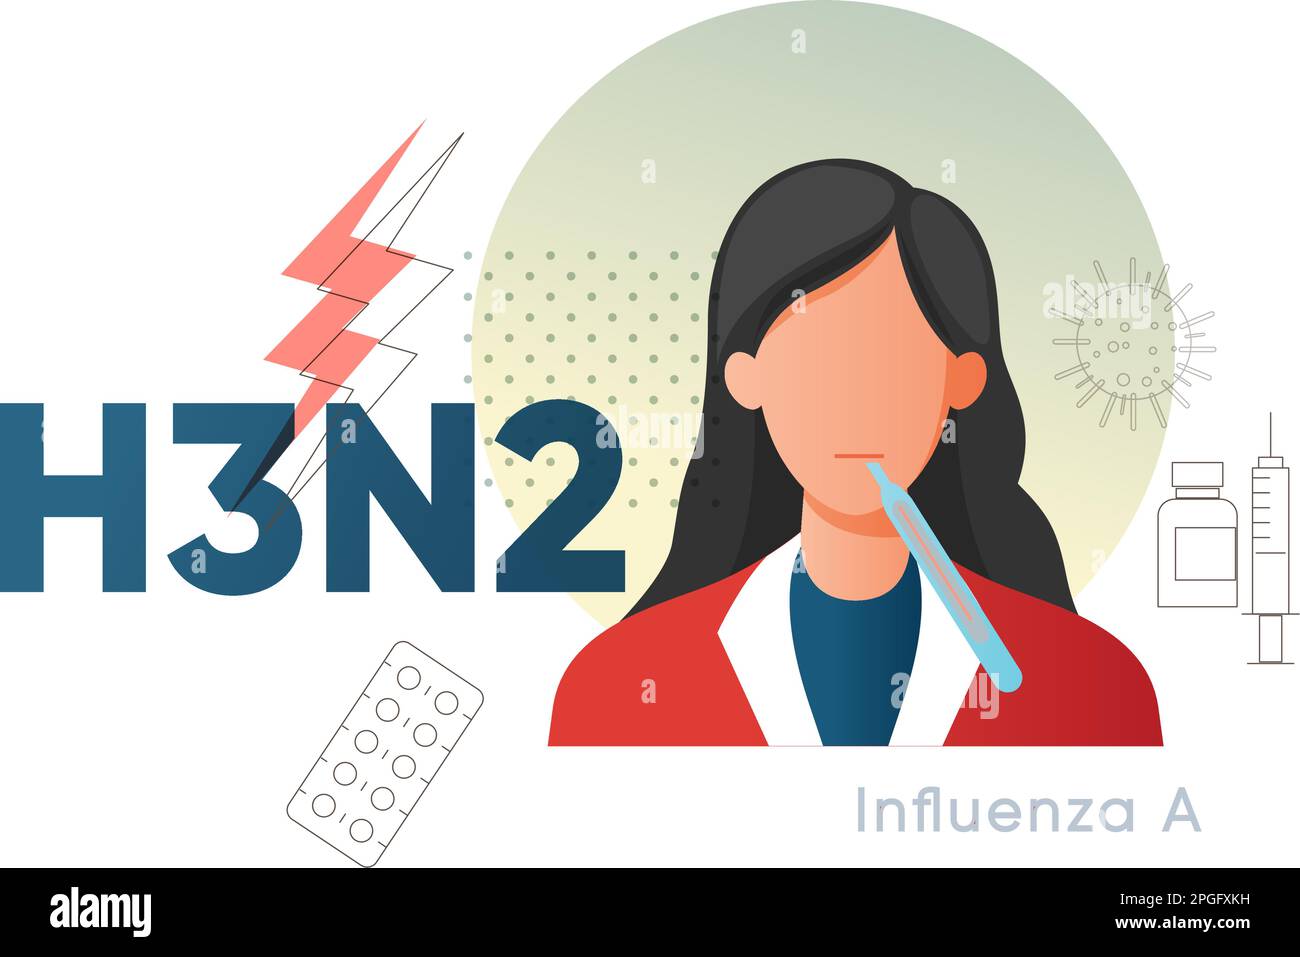 Influenza A - H3N2 - Virus - Stock Icon as EPS 10 File Stock Vector